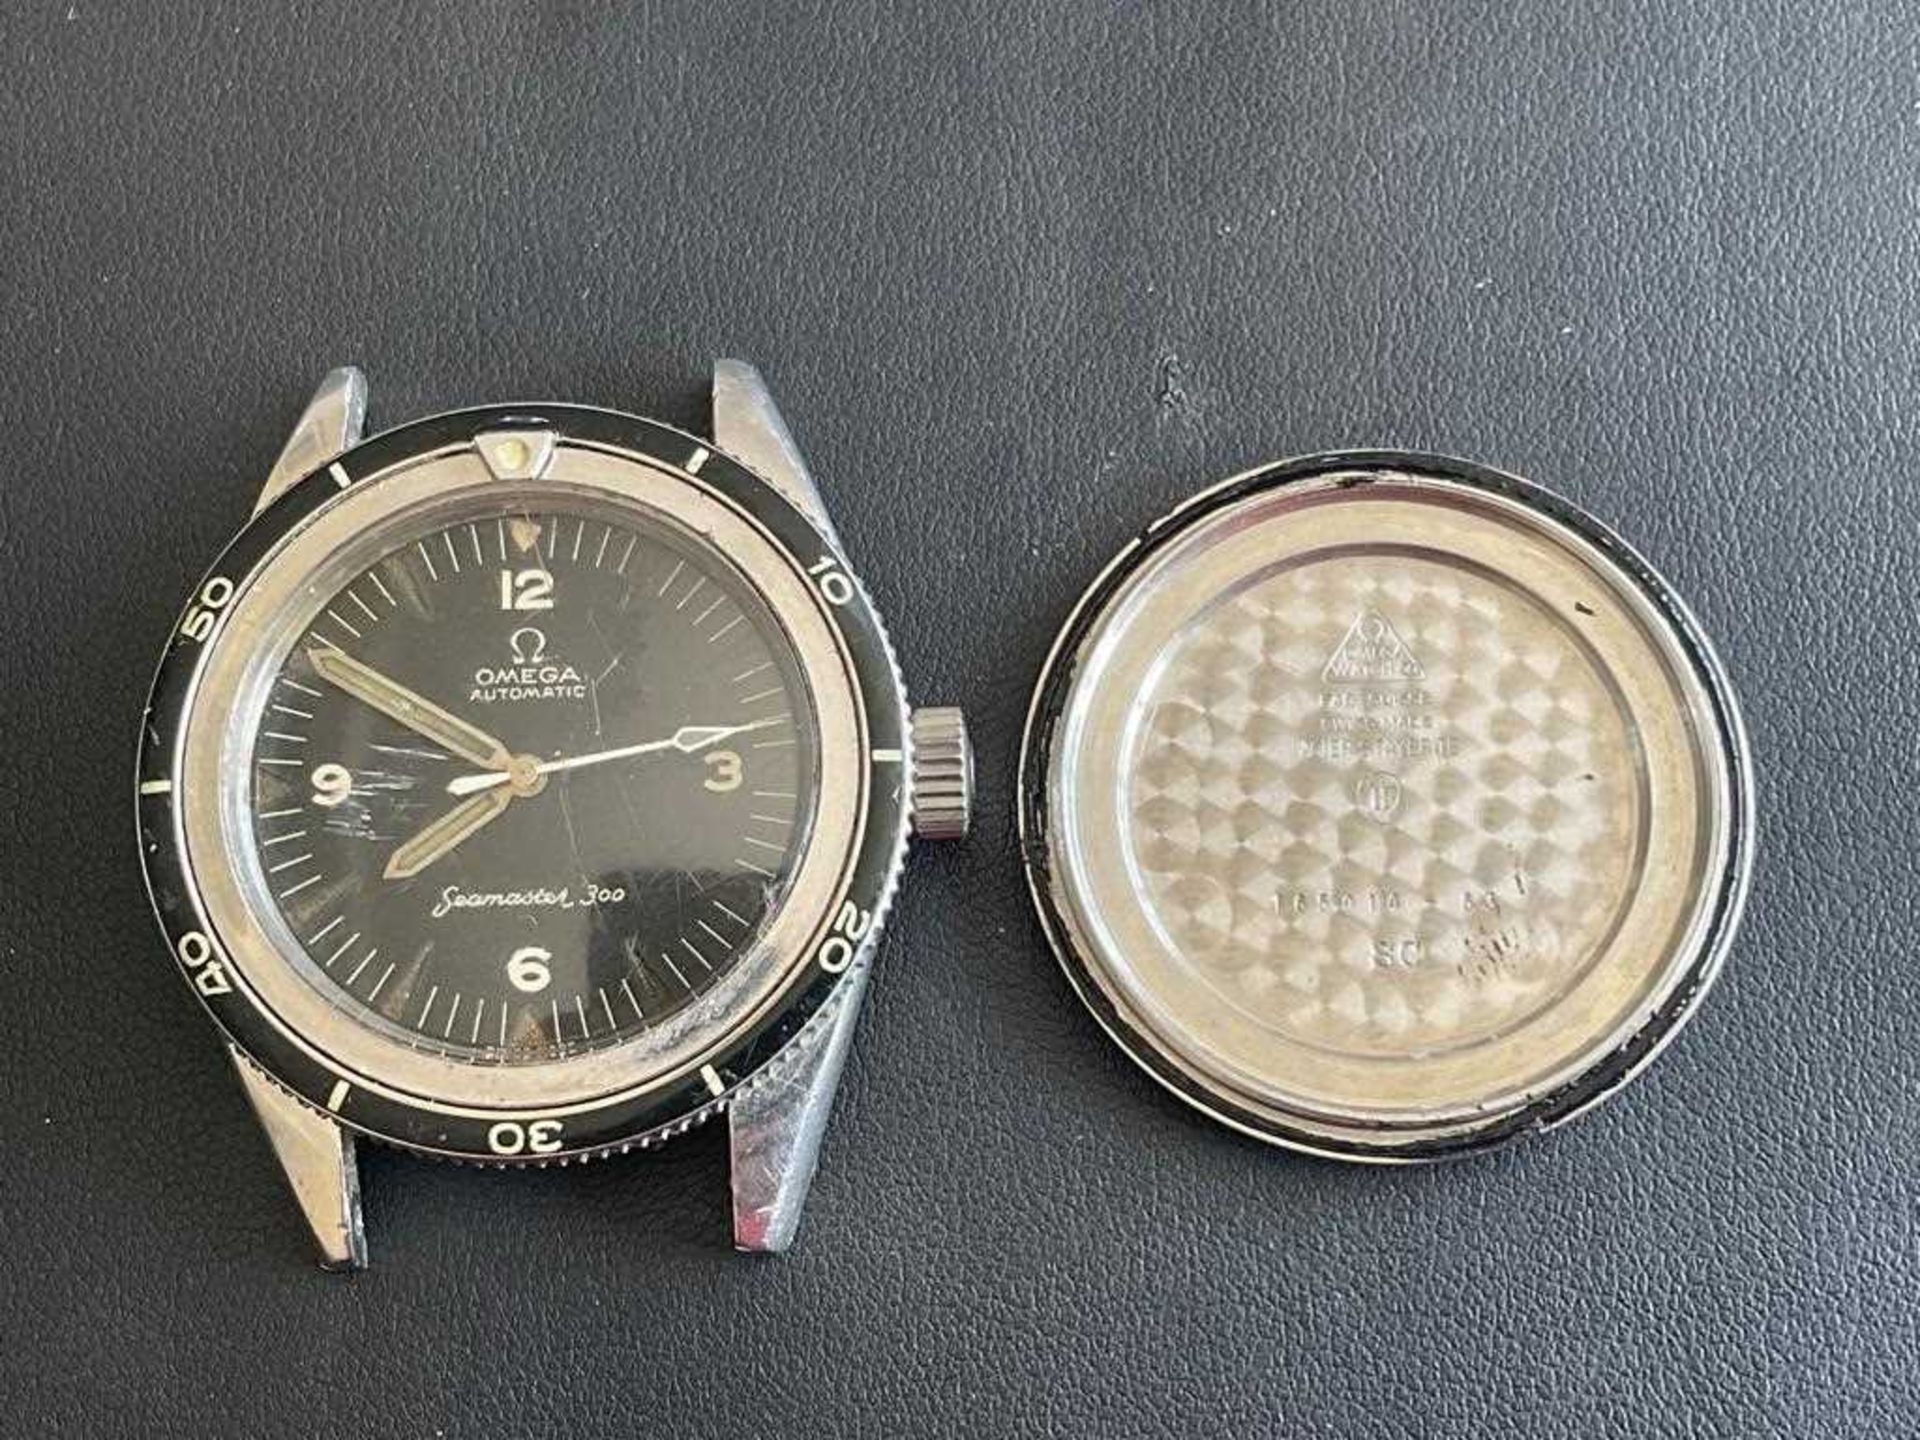 A GENTS STEEL OMEGA SEAMASTER 300 AUTOMATIC WATCH HEAD - Image 11 of 11